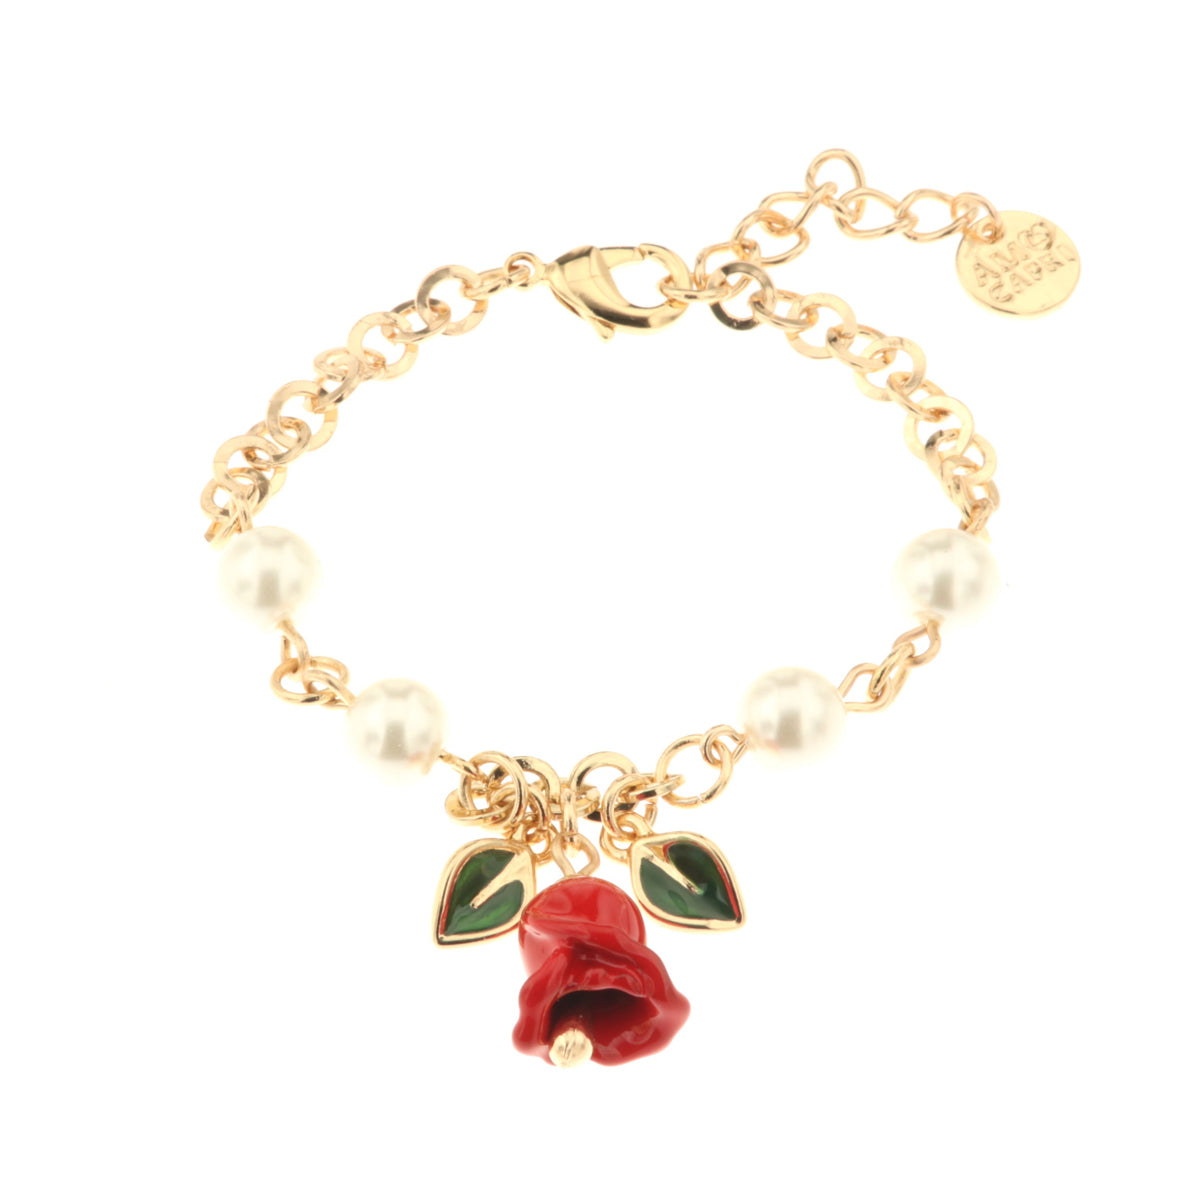 Metal bracelet with pearls, leaves and bell -shaped bell embellished with colored glazes